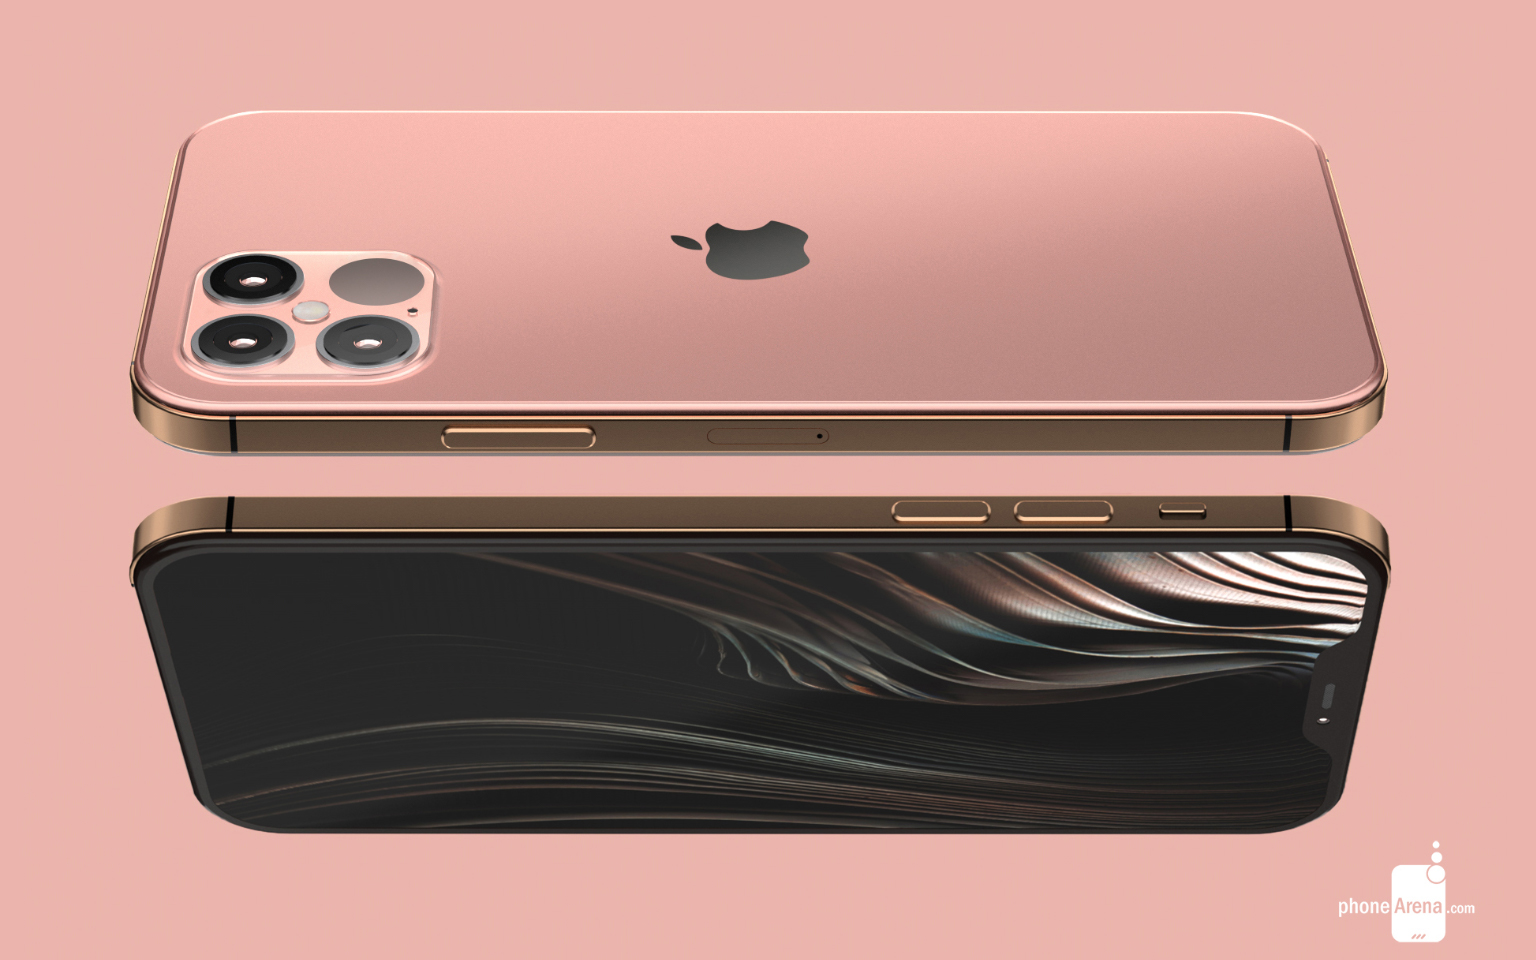 Stunning Iphone 12 Design Is The Flagship We Ve Been Waiting For